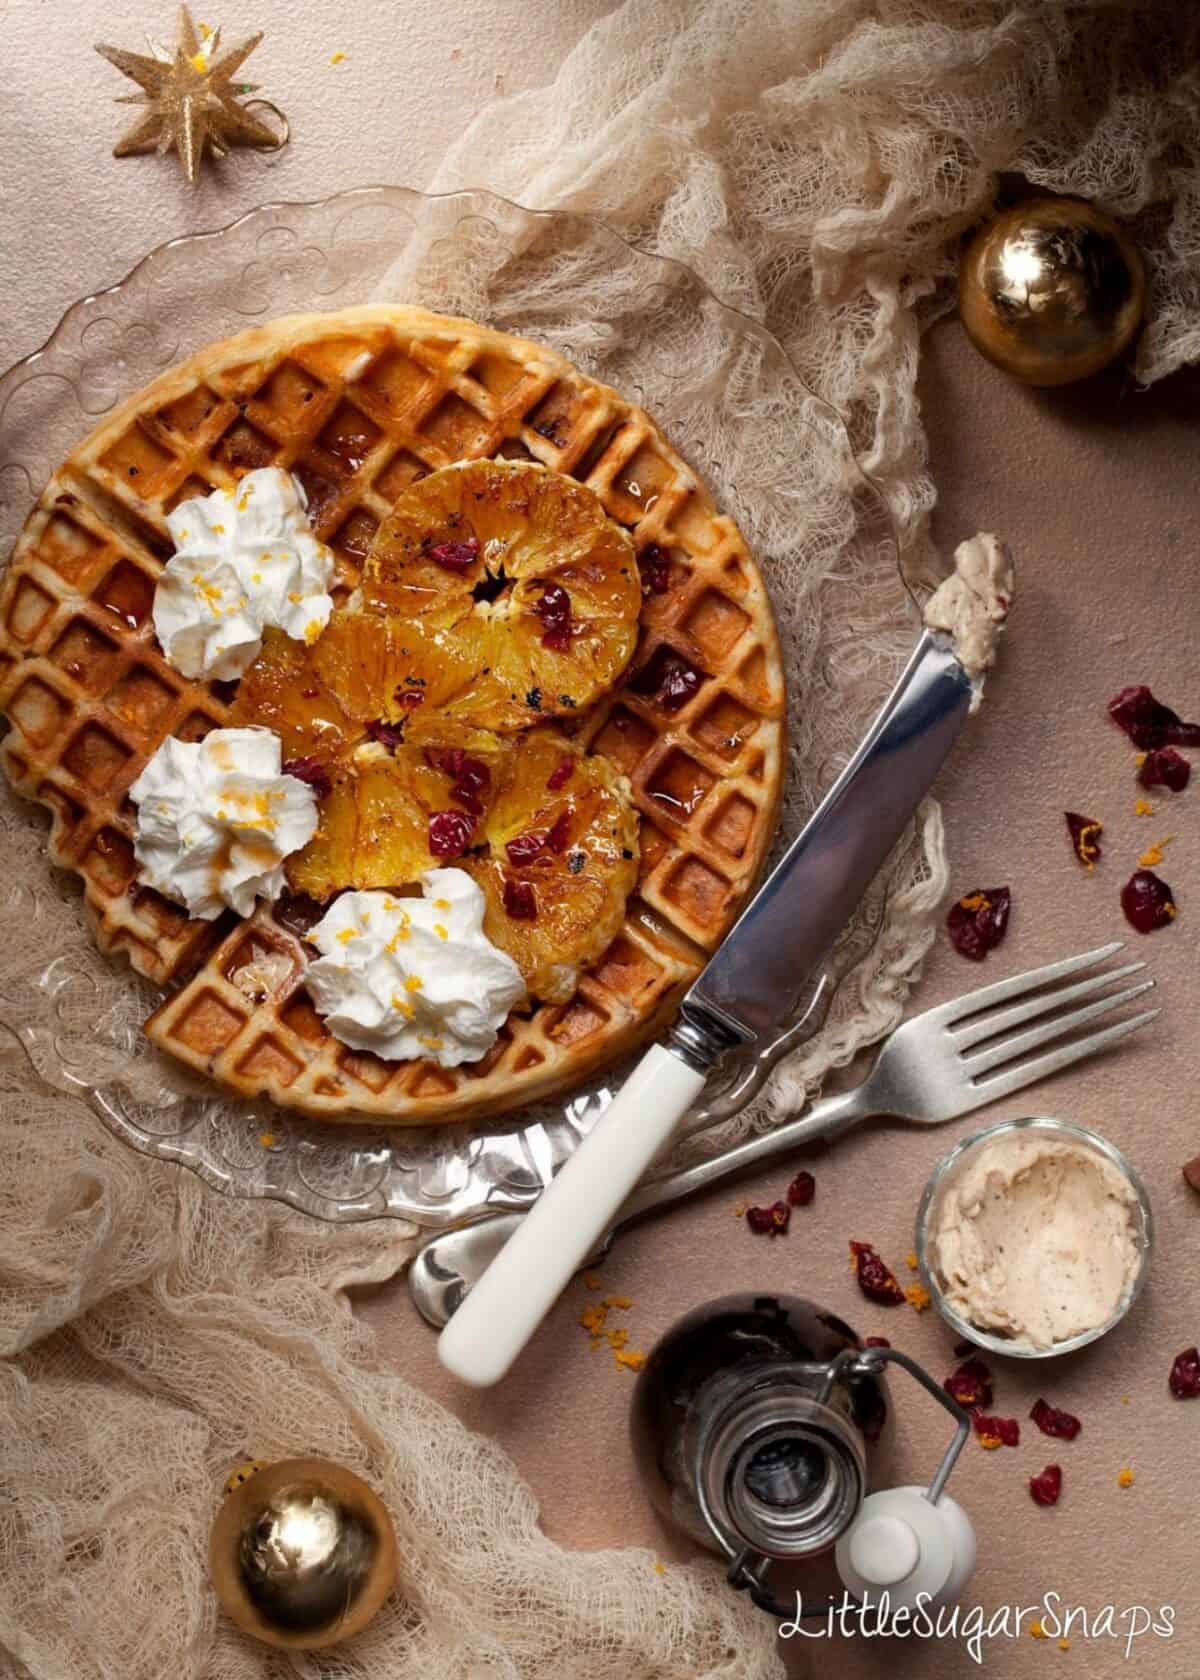 Waffles with griddled orange slices and dried cranberries.